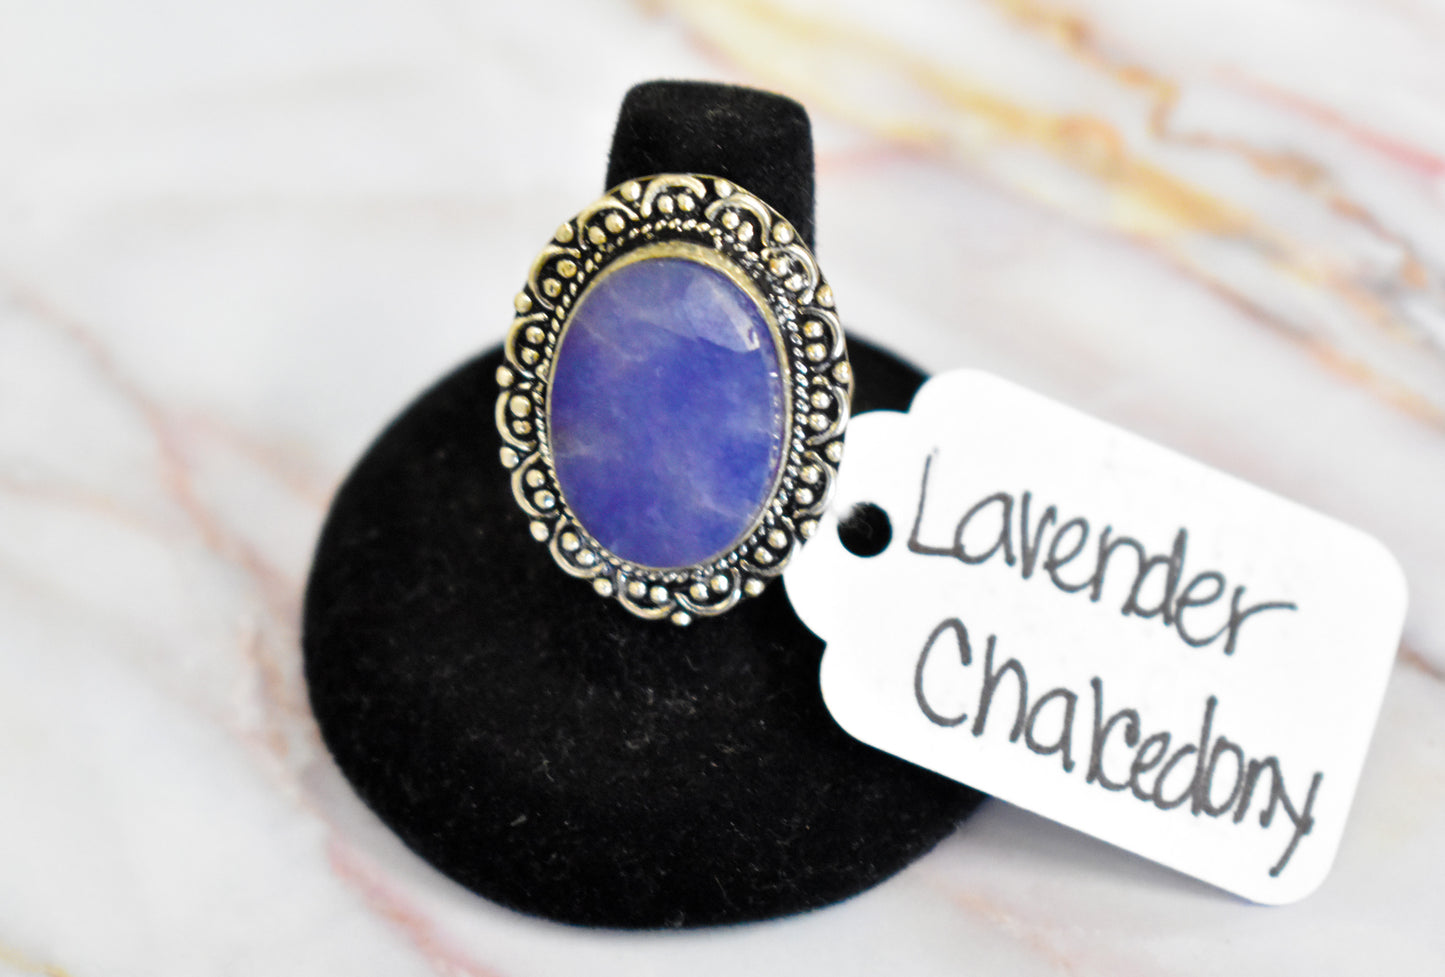 stones-of-transformation - Lavender Chalcedony Ring (Size 8.5) - Stones of Transformation - 